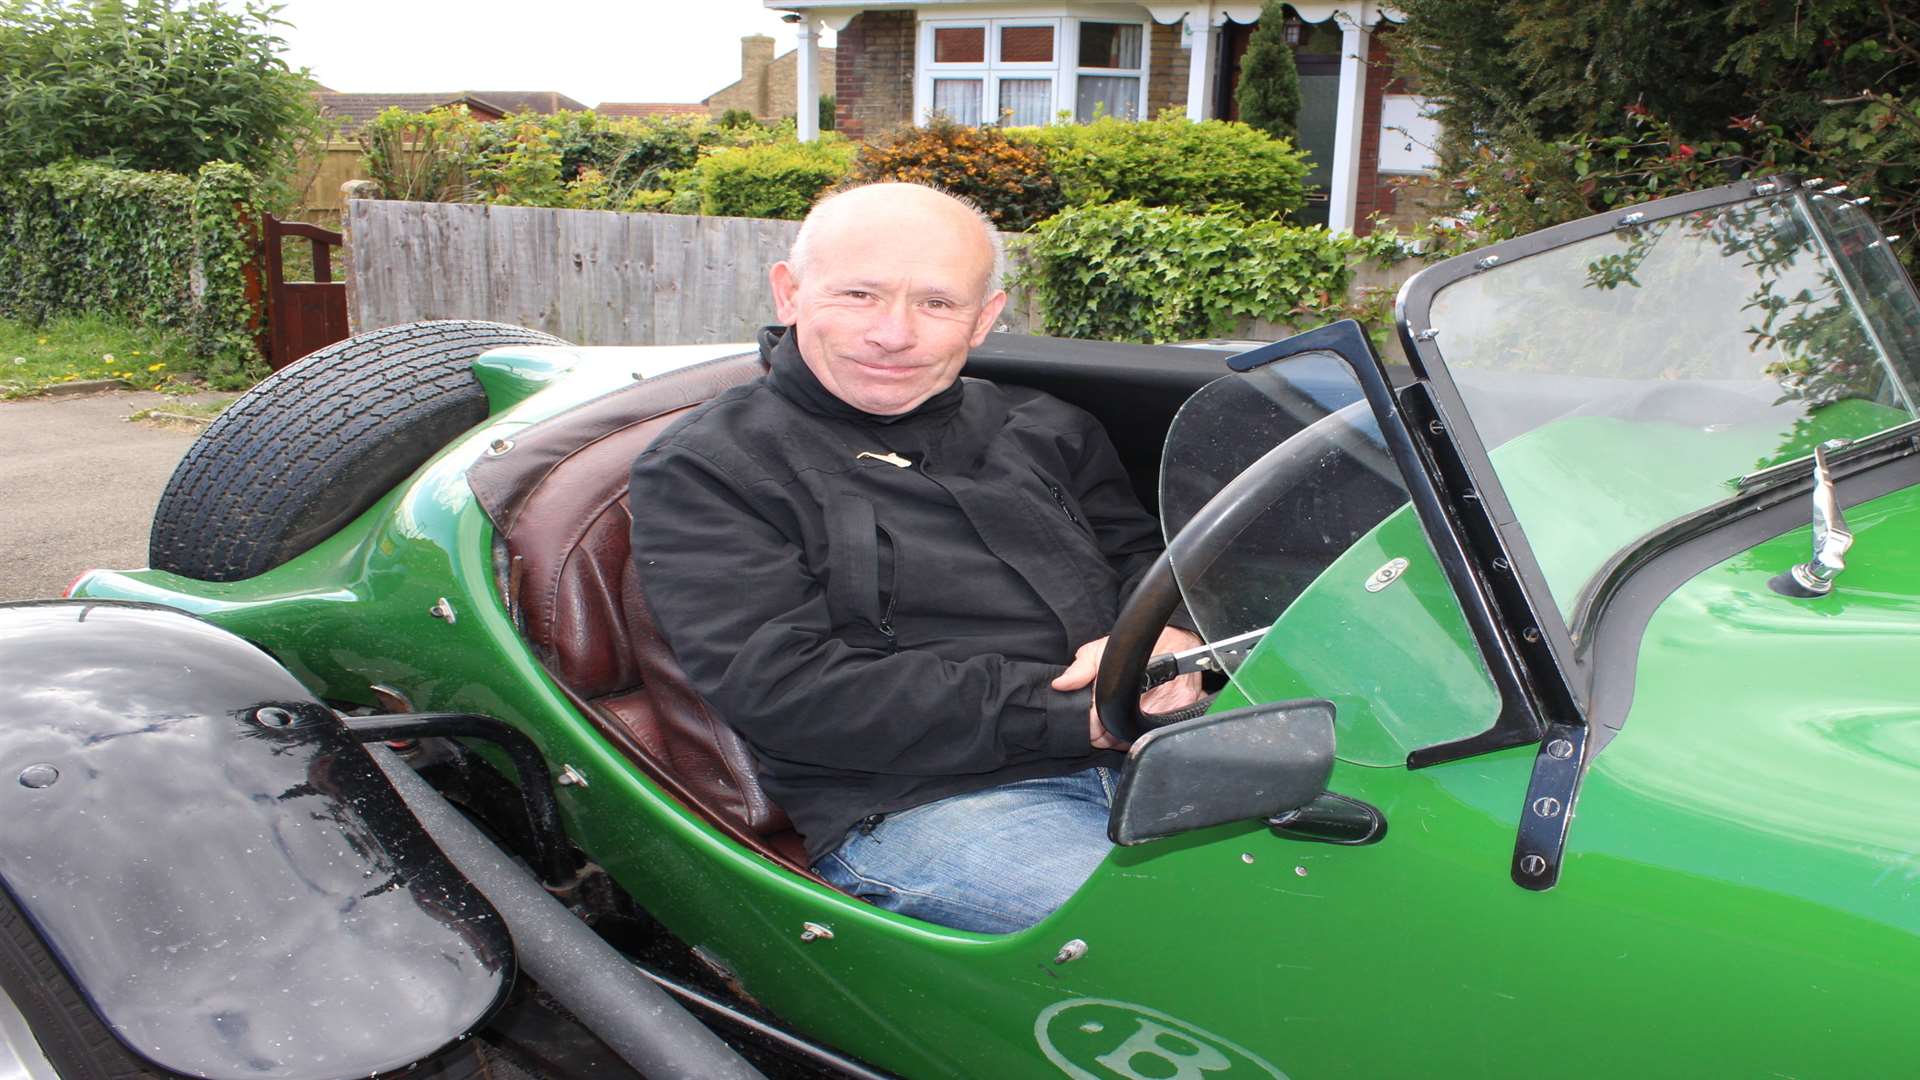 William Wallace who will be exhibiting his rare British Racing Green open-top Bentley at the Sheerness Classic Motor Show.